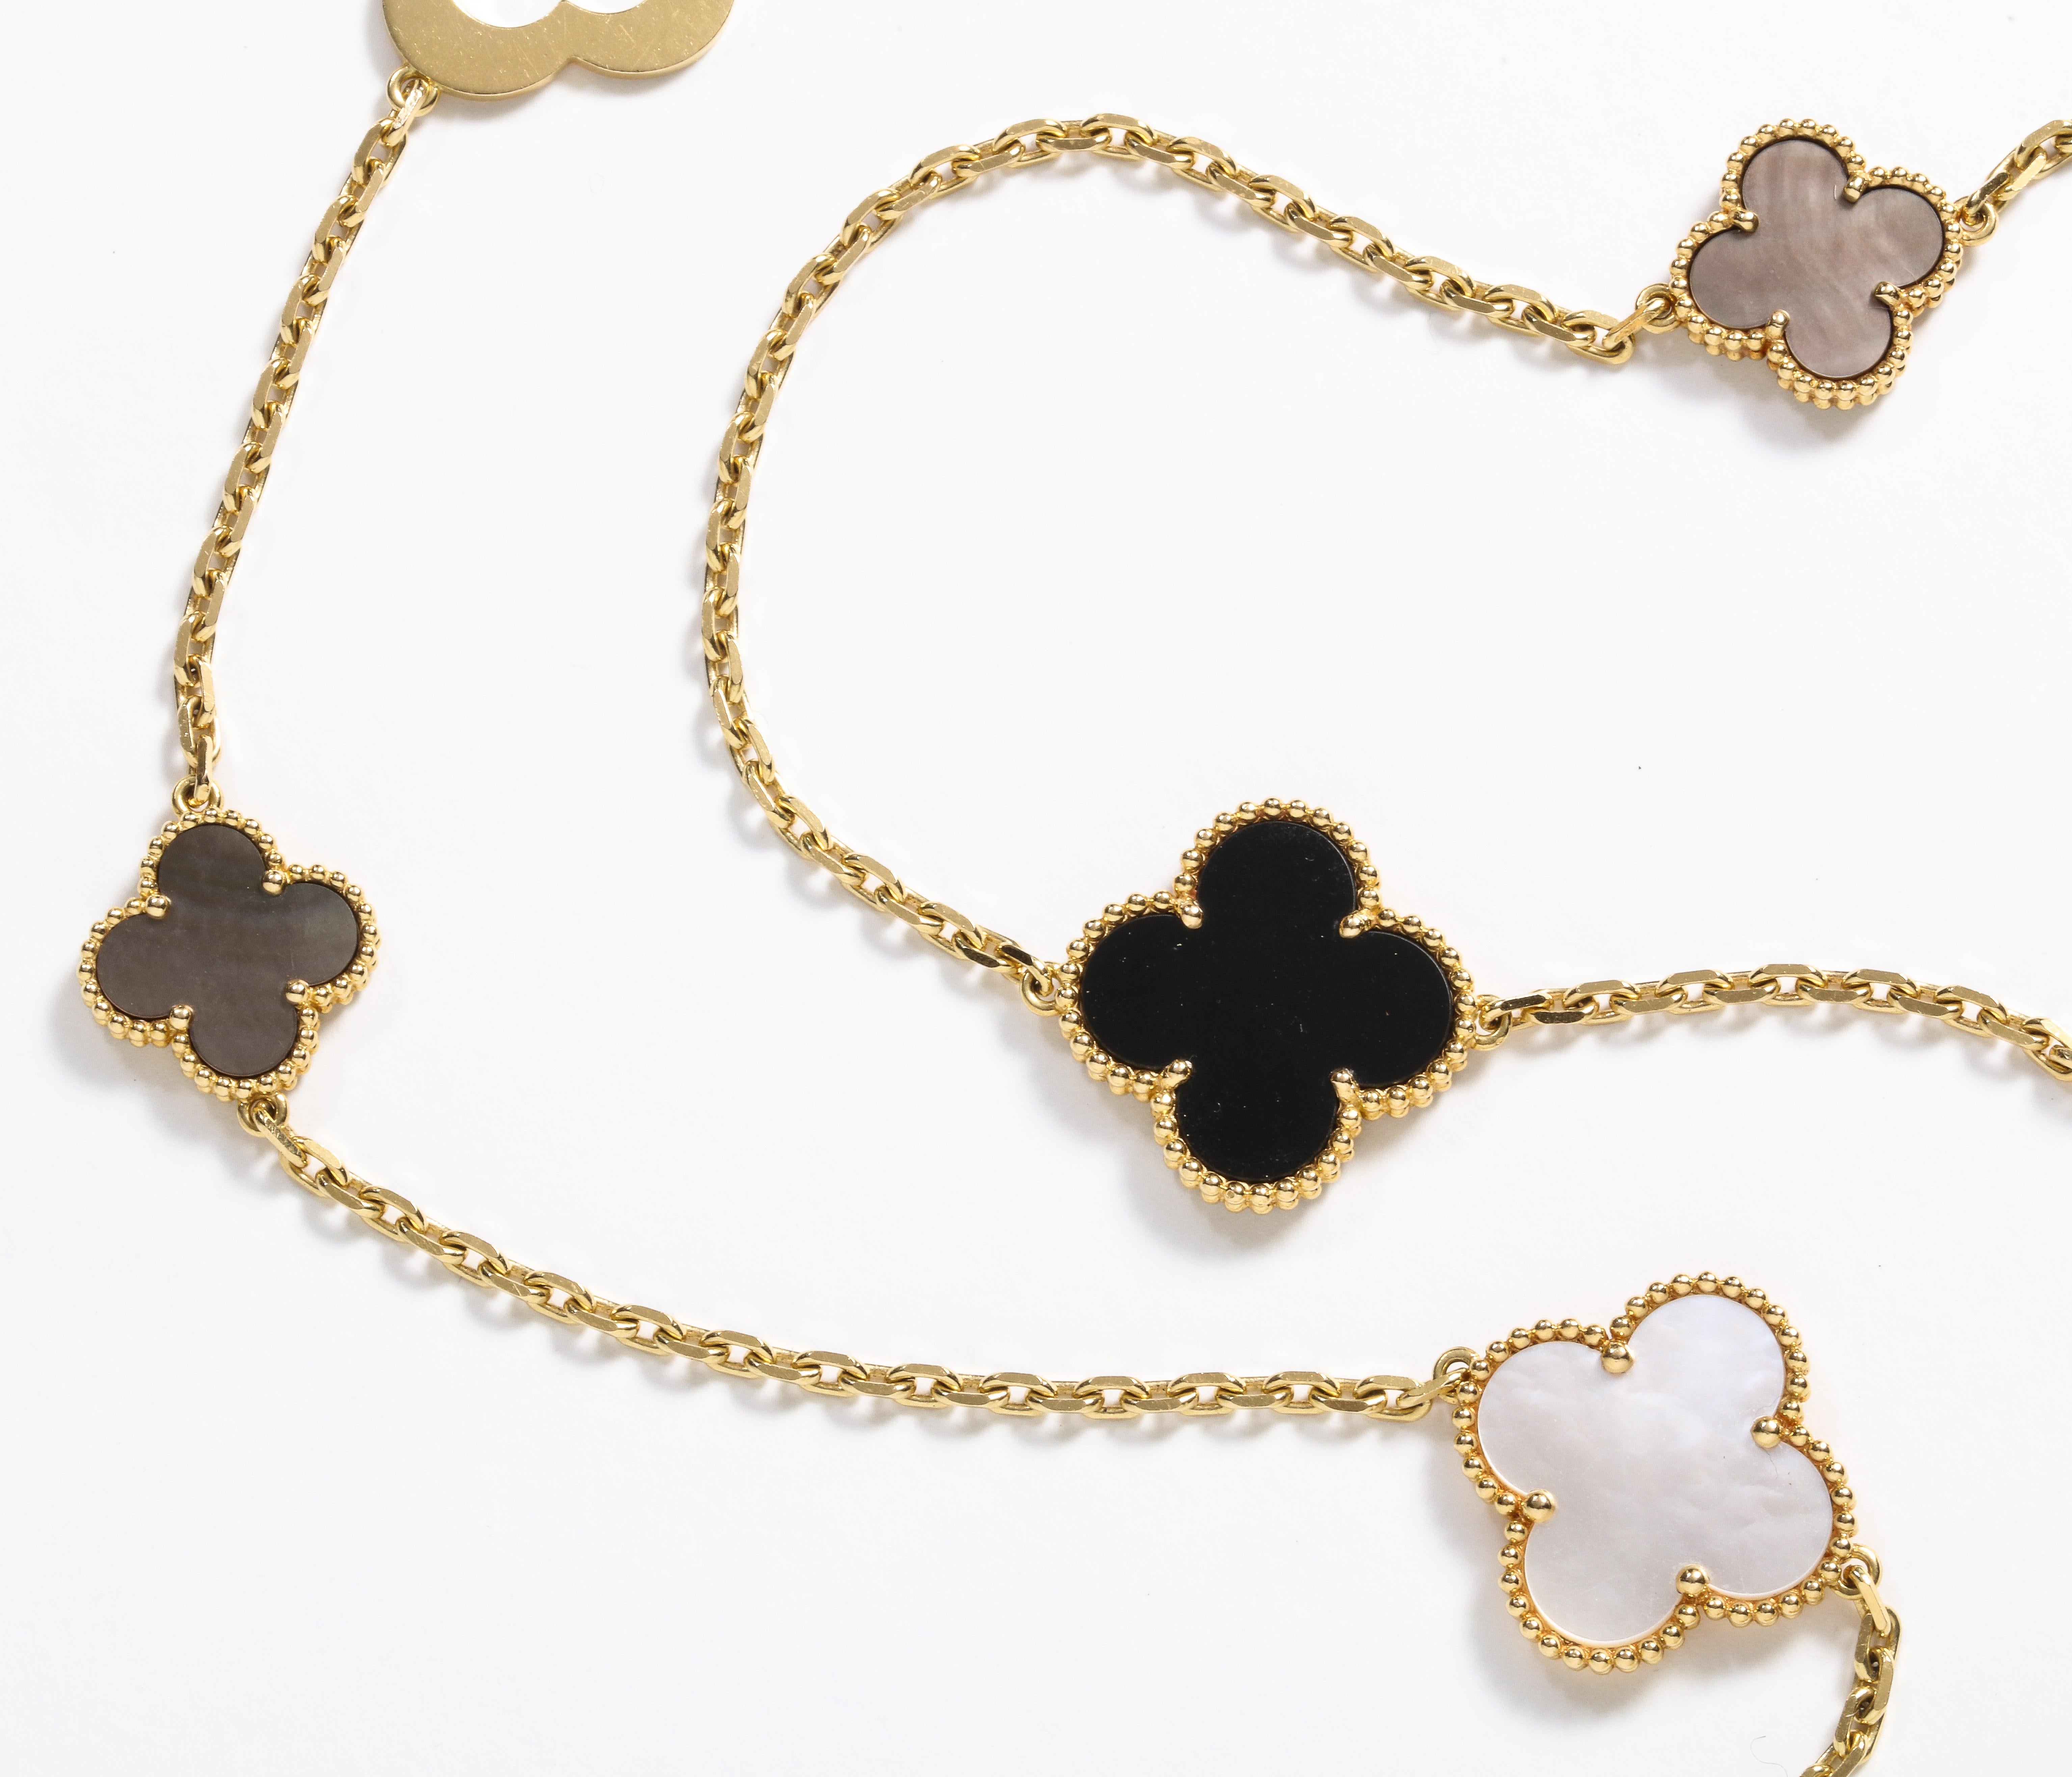 Van Cleef & Arpels & Chloe, a Rare, Limited-Edition 18K Gold Alhambra Necklace 4